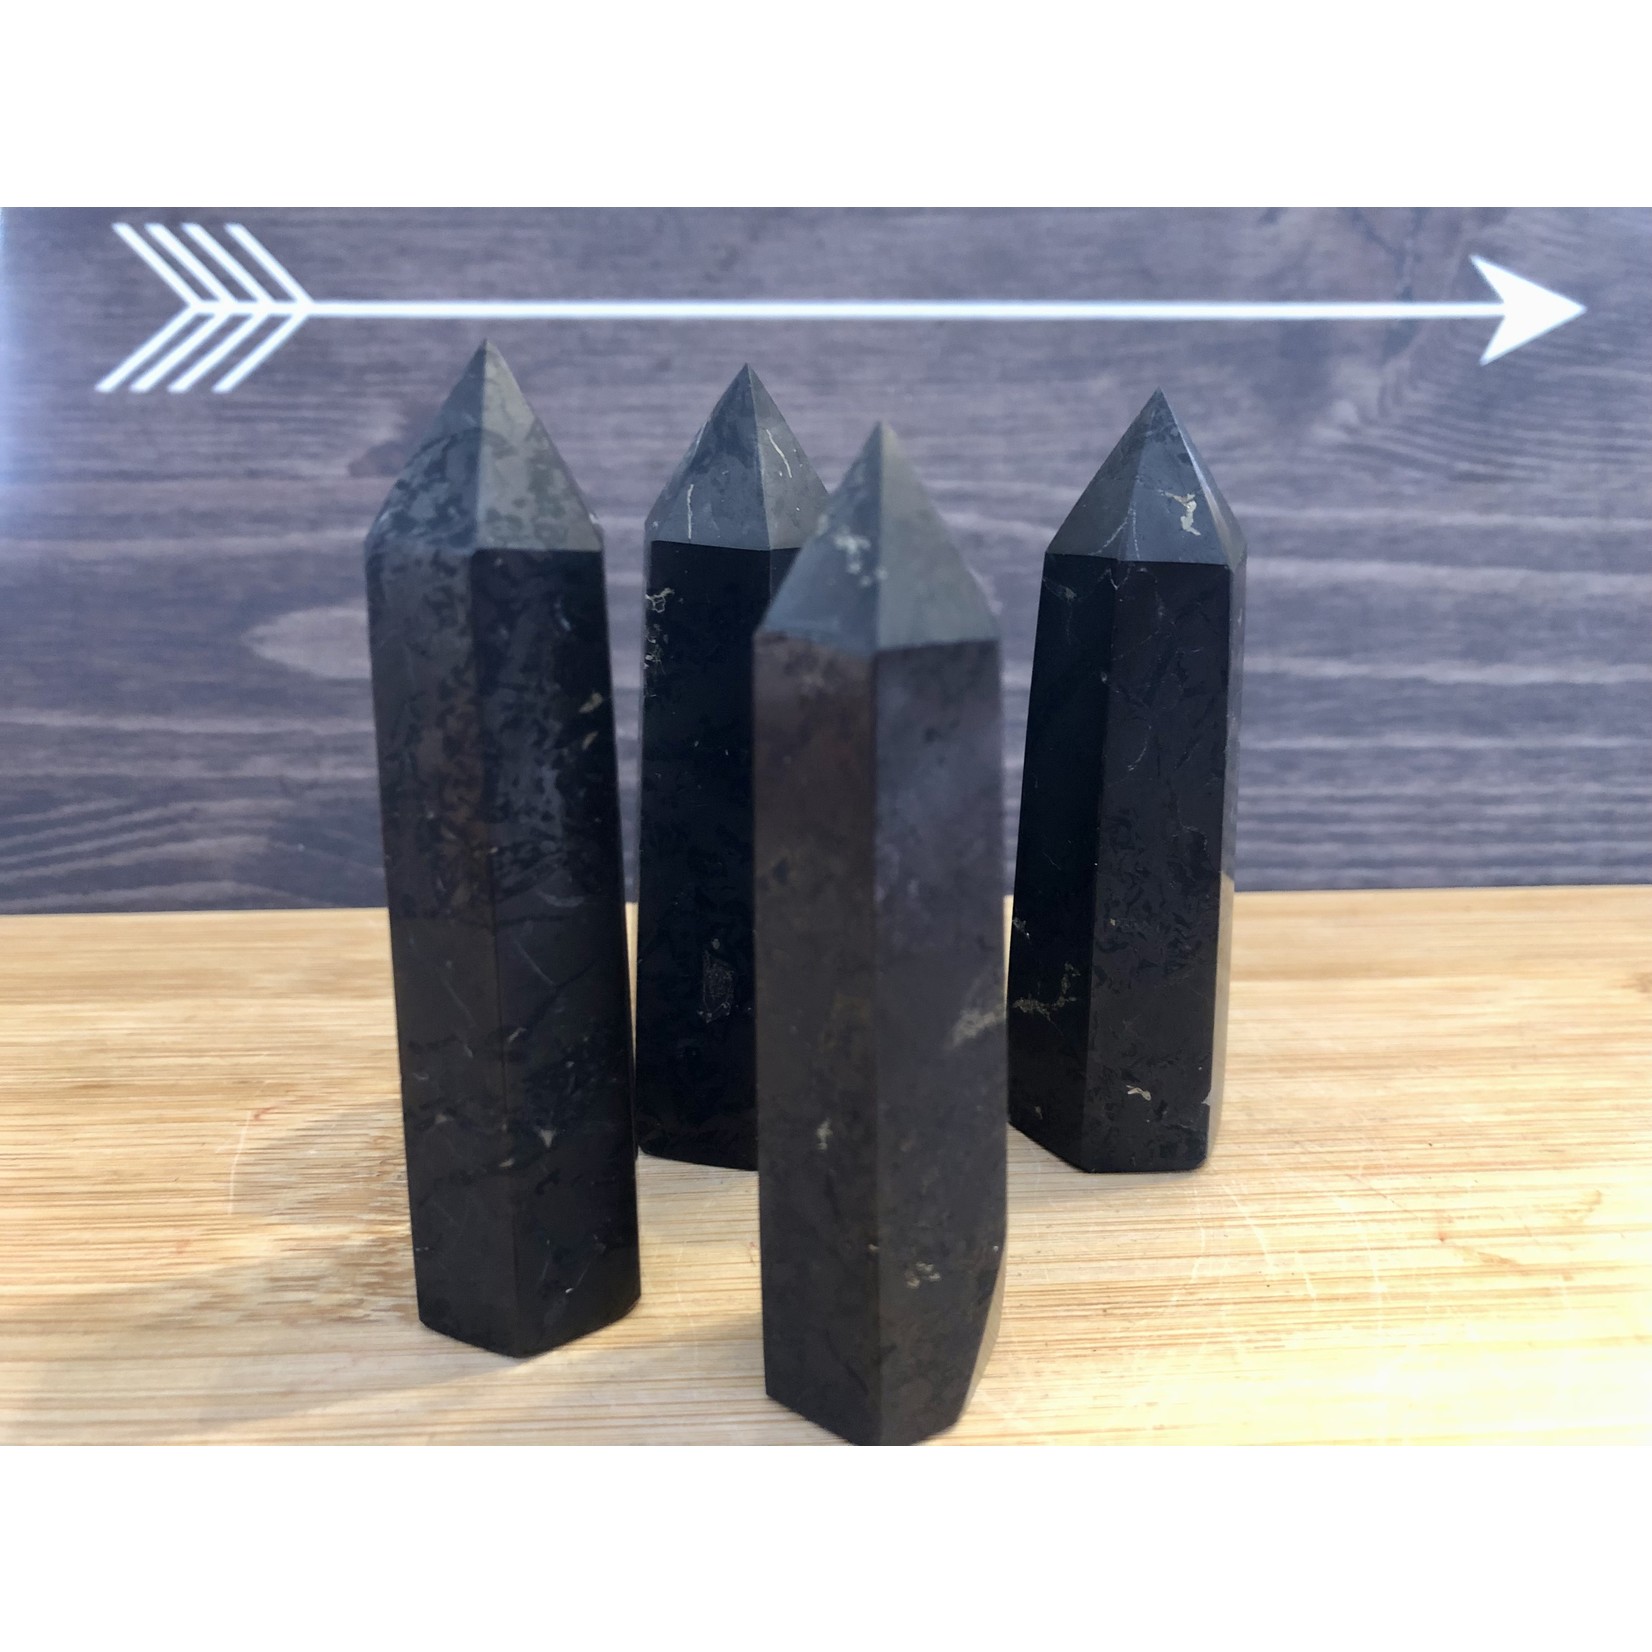 natural shungite tower, black stone has a unique and remarkable ability, neutralizes electromagnetic disturbances harmful to health